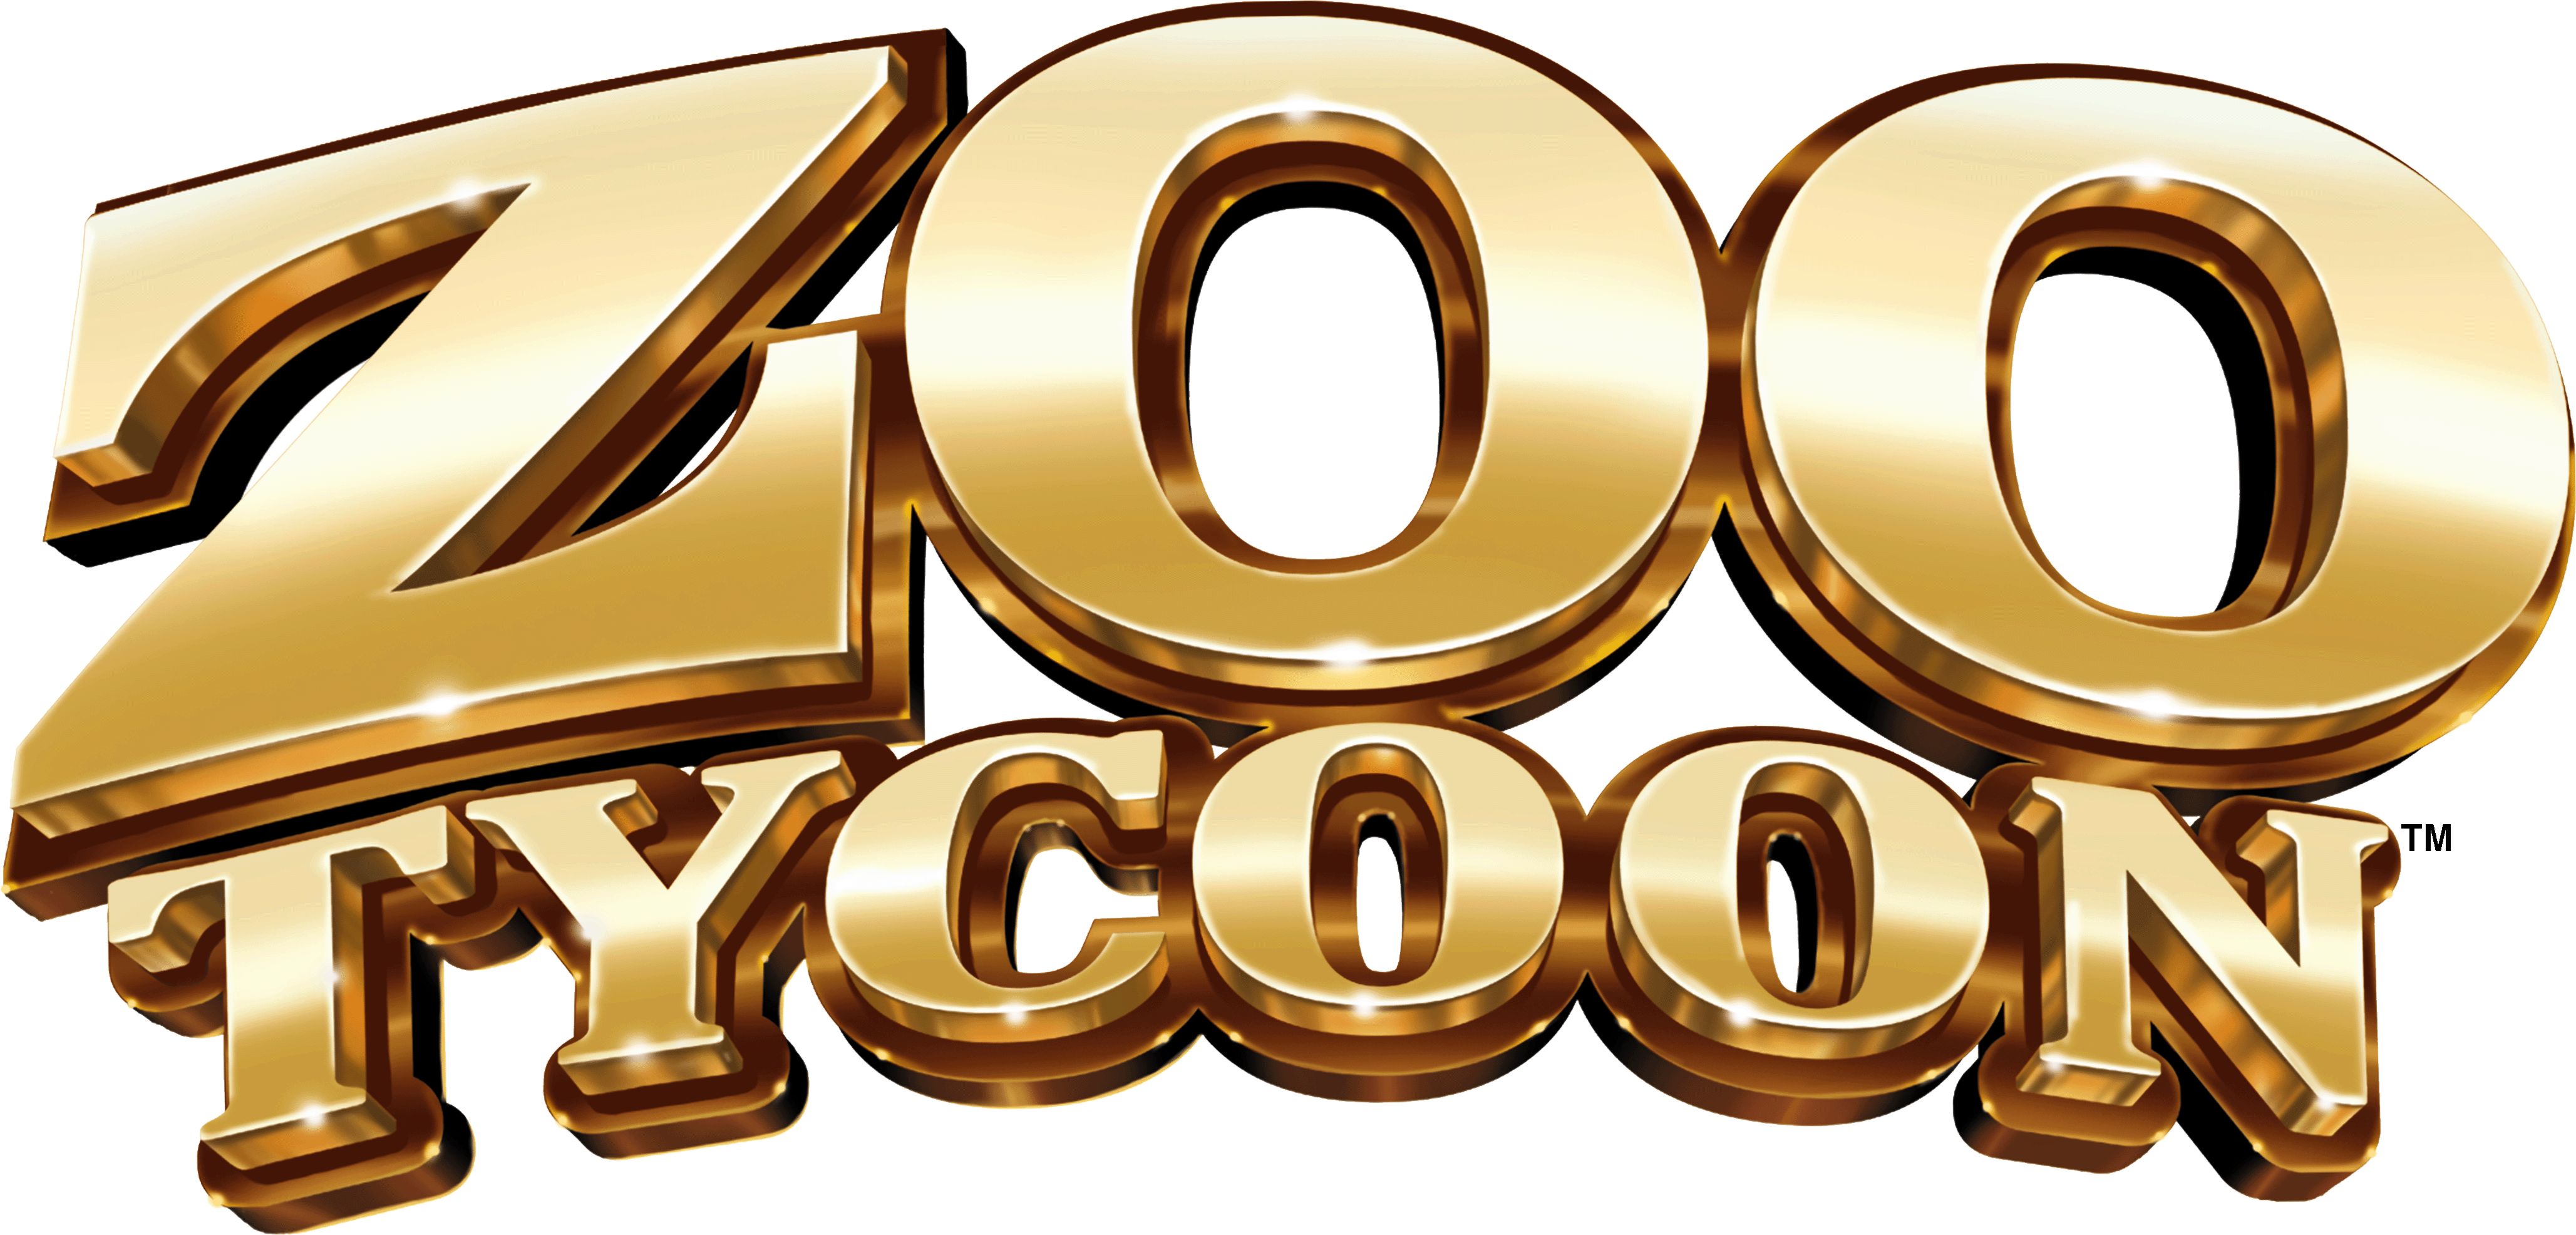 zoo tycoon 1 complete collection mods